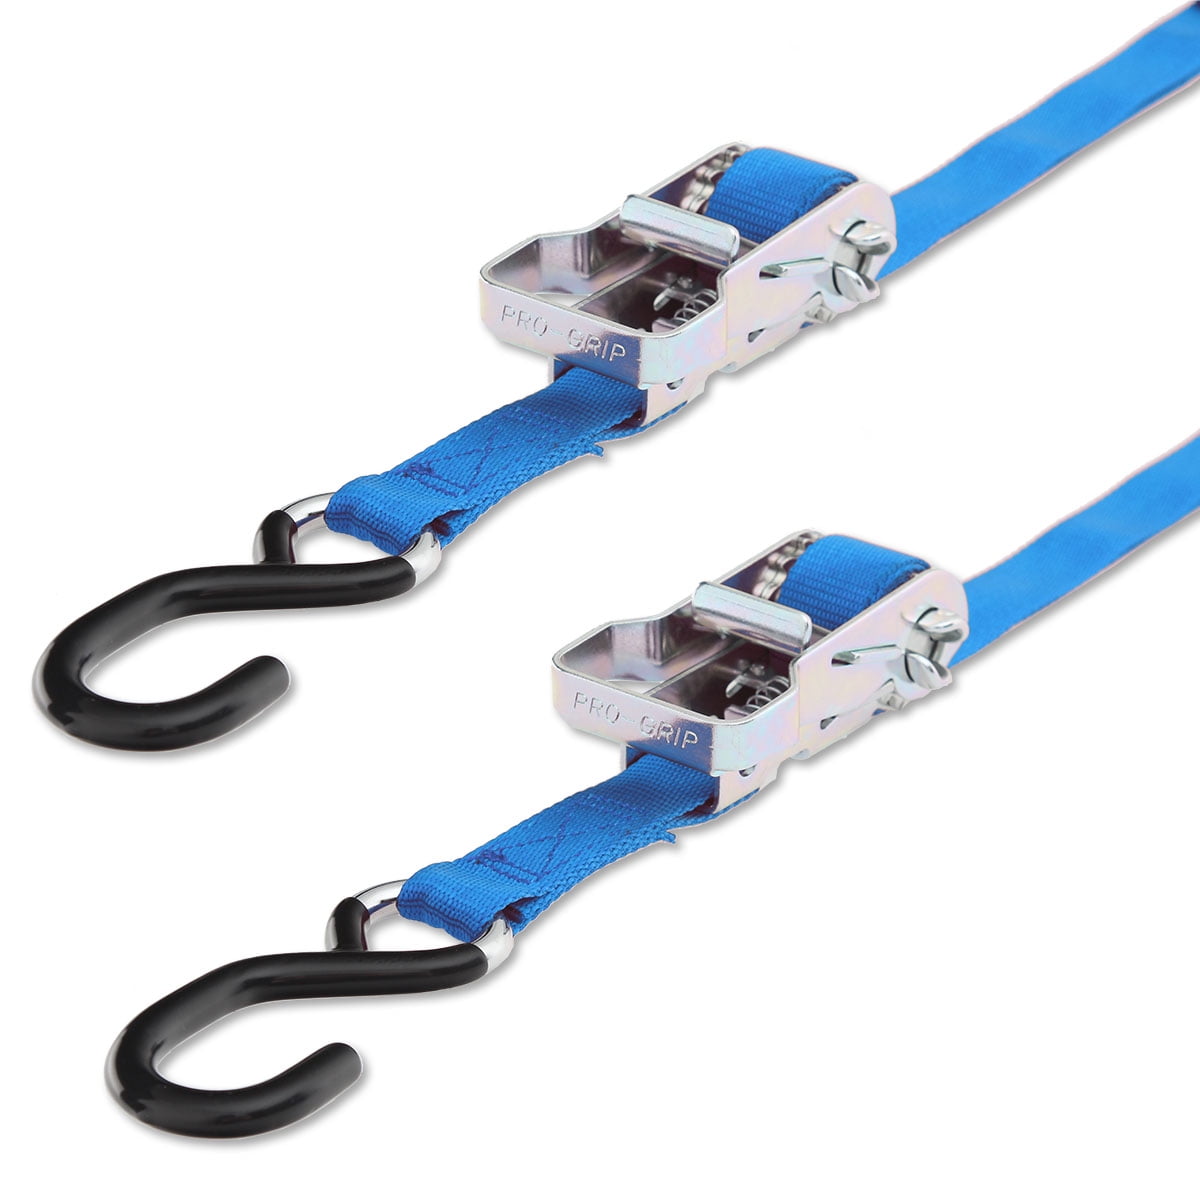 Progrip Powersports Motorcycle Ratchet Tie Down Straps Lab Tested 2 Pack Blue